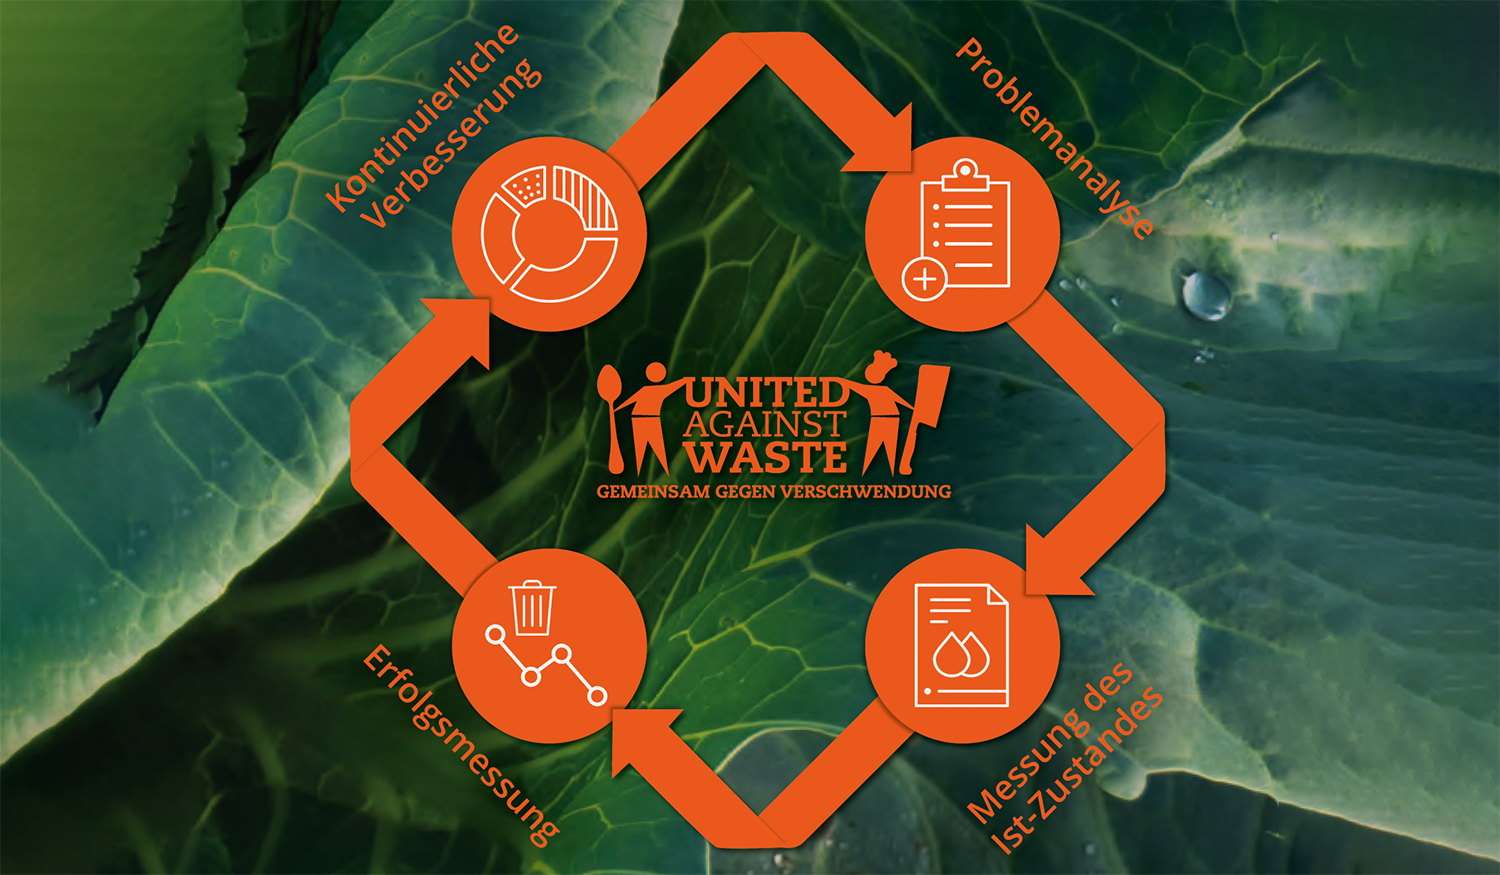 The eternal fight against food waste – today with new means!